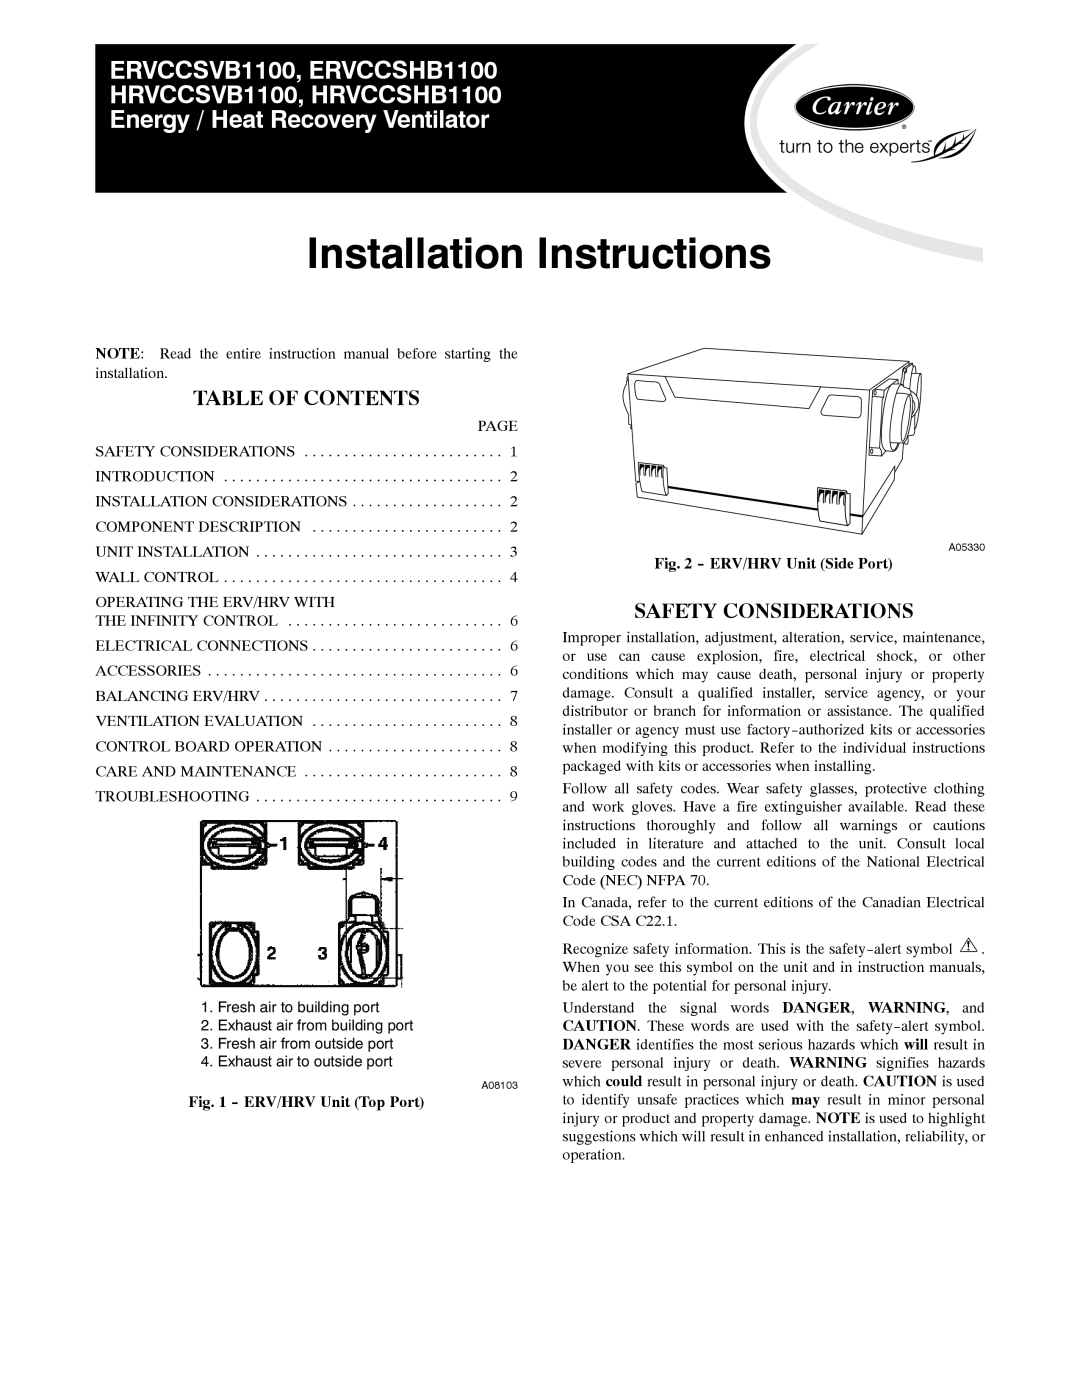 Carrier ERVCCSHB1100 installation instructions Table Of Contents, Safety Considerations, ERV/HRV Unit Top Port 